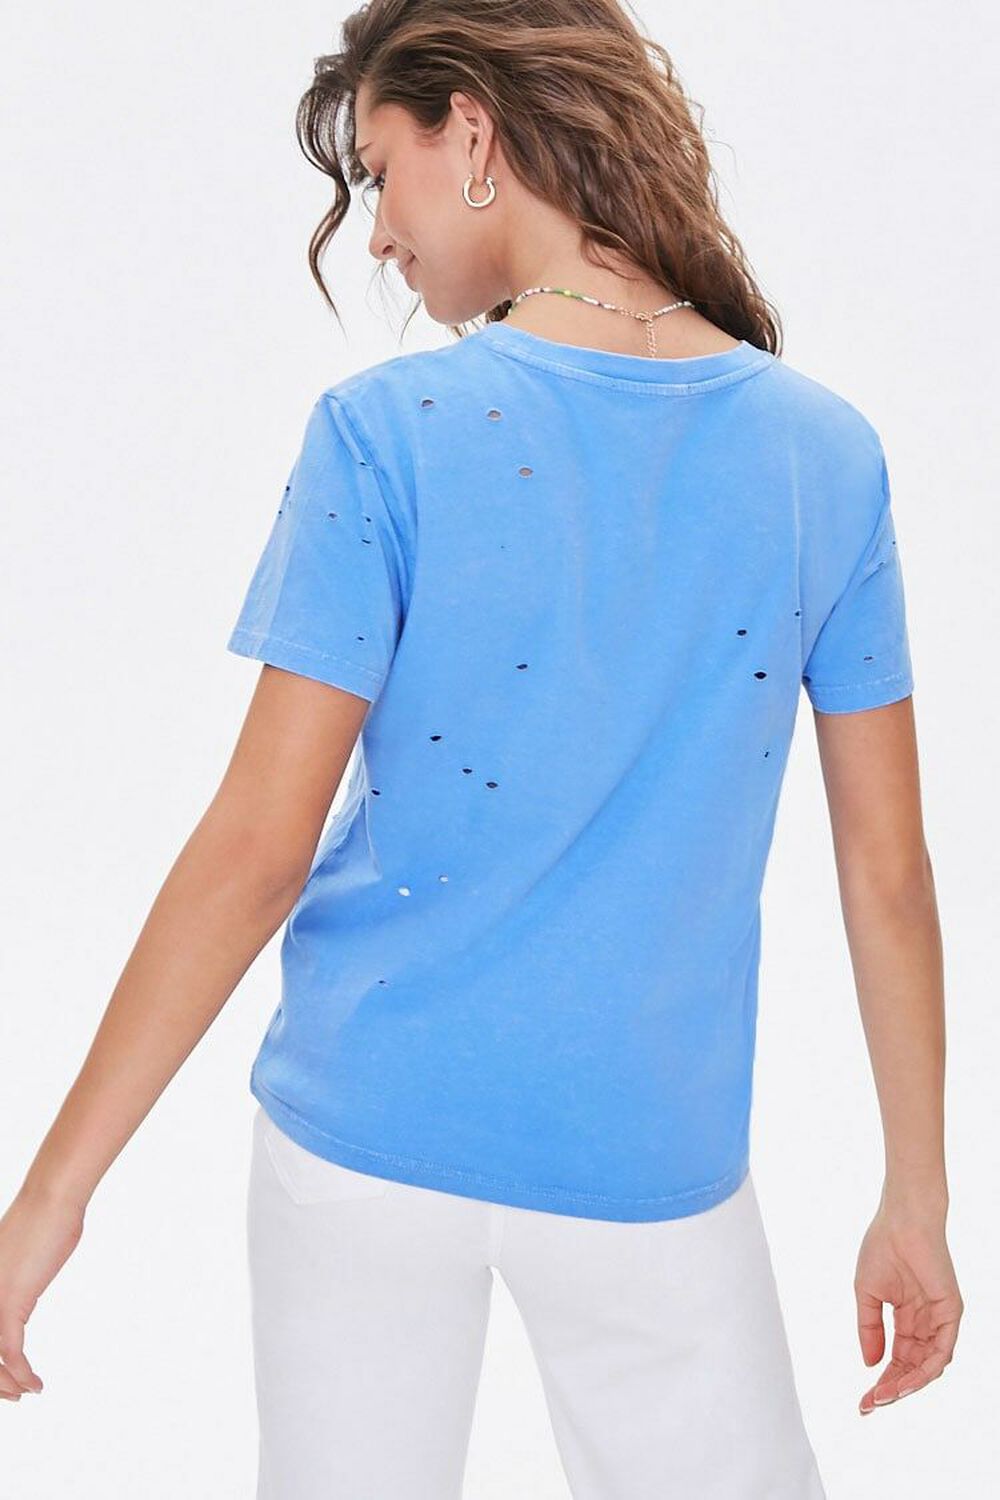 BLUE Distressed Mineral Wash Tee, image 3